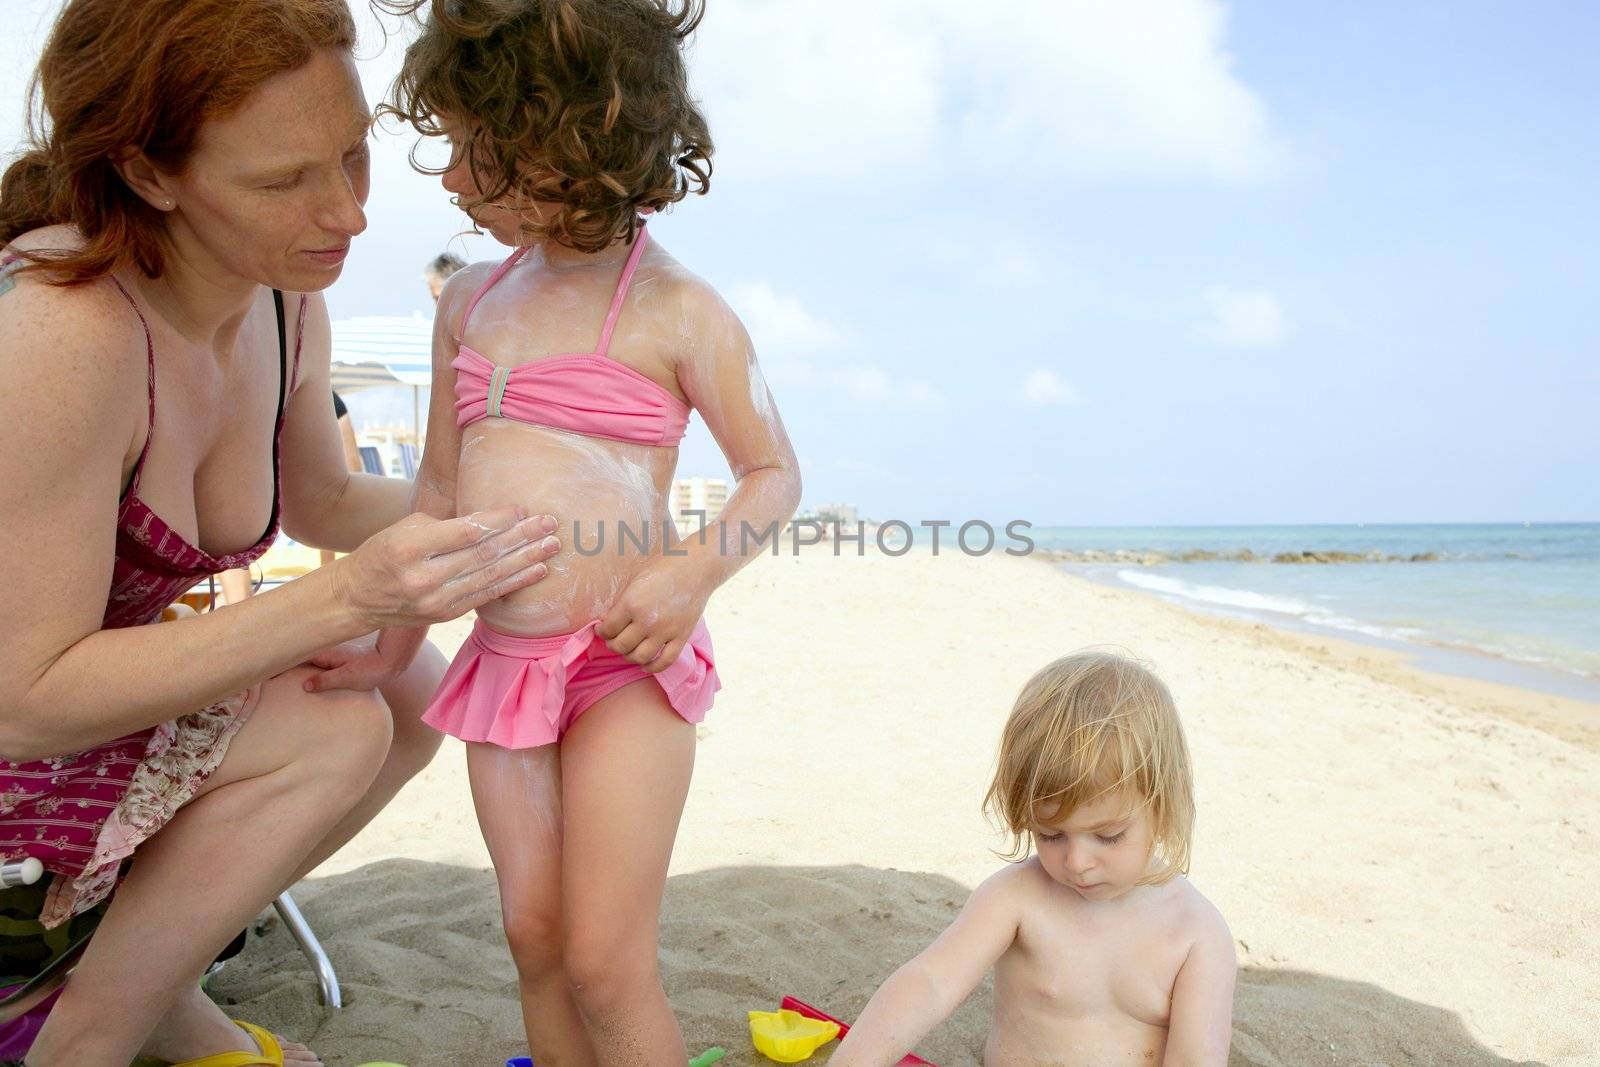 Daughter and mother on the beach sun screen protection moisture cream